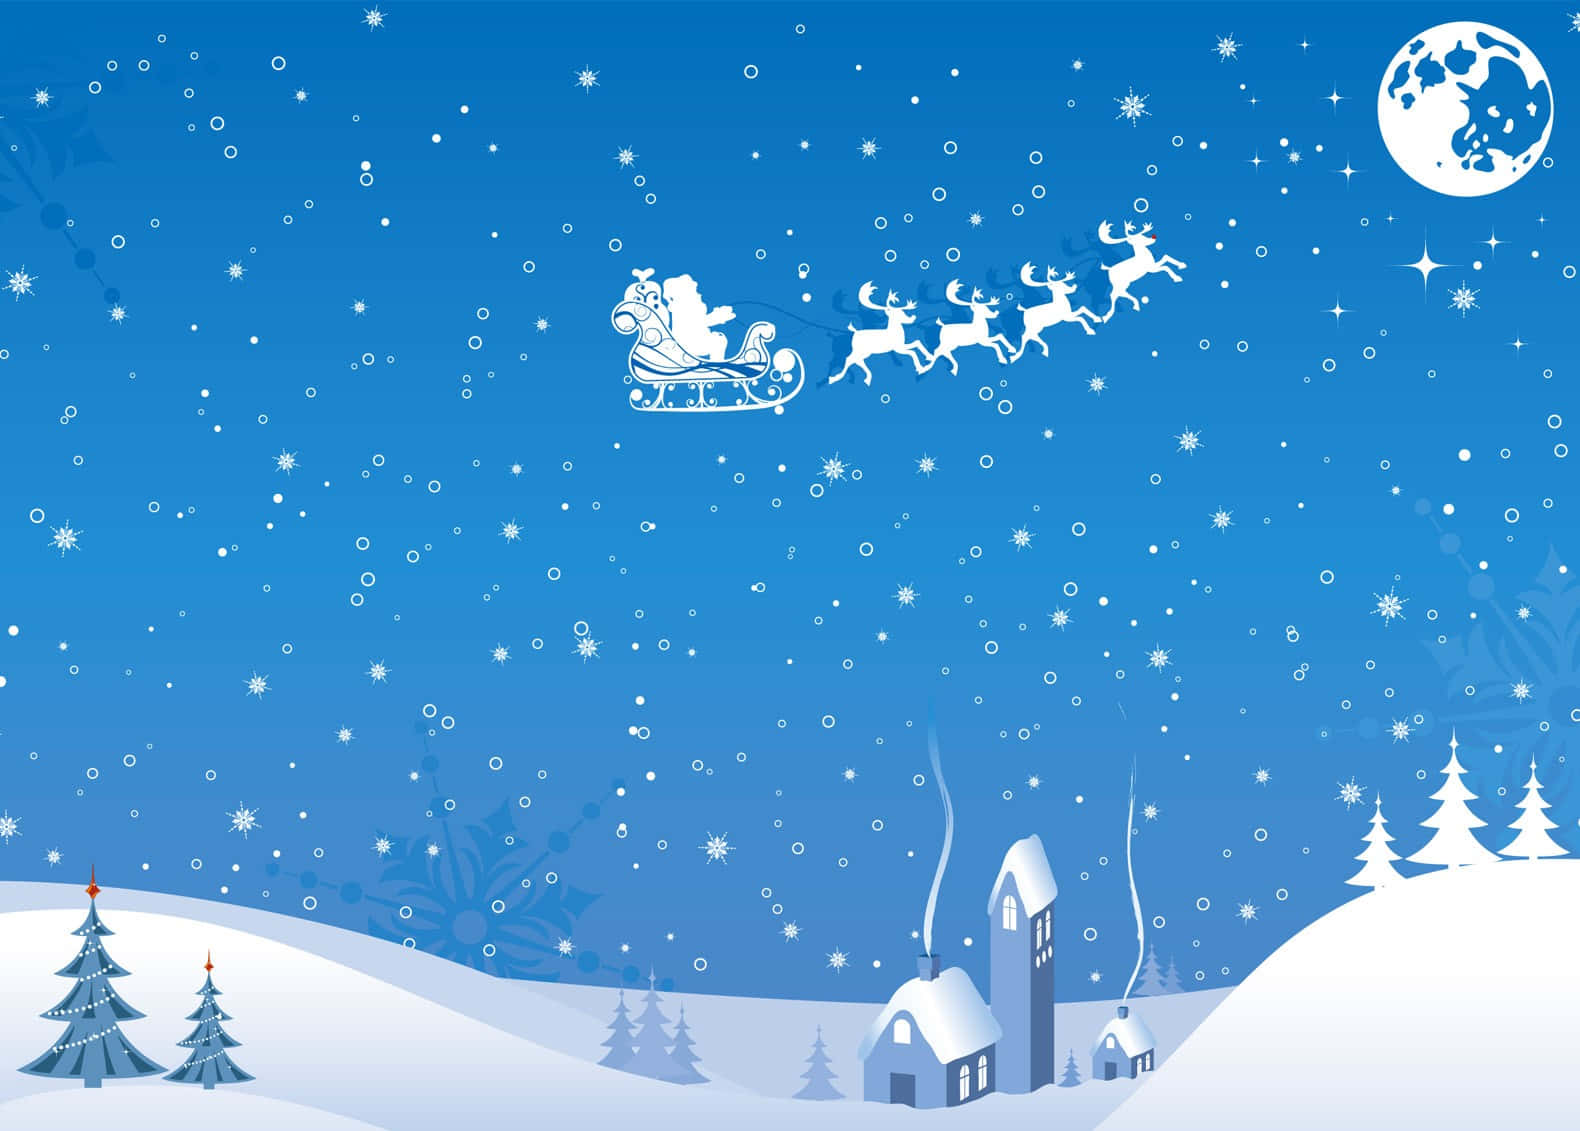 Celebrate the Joyous Christmas Holiday with a Beautiful High Resolution Christmas Background